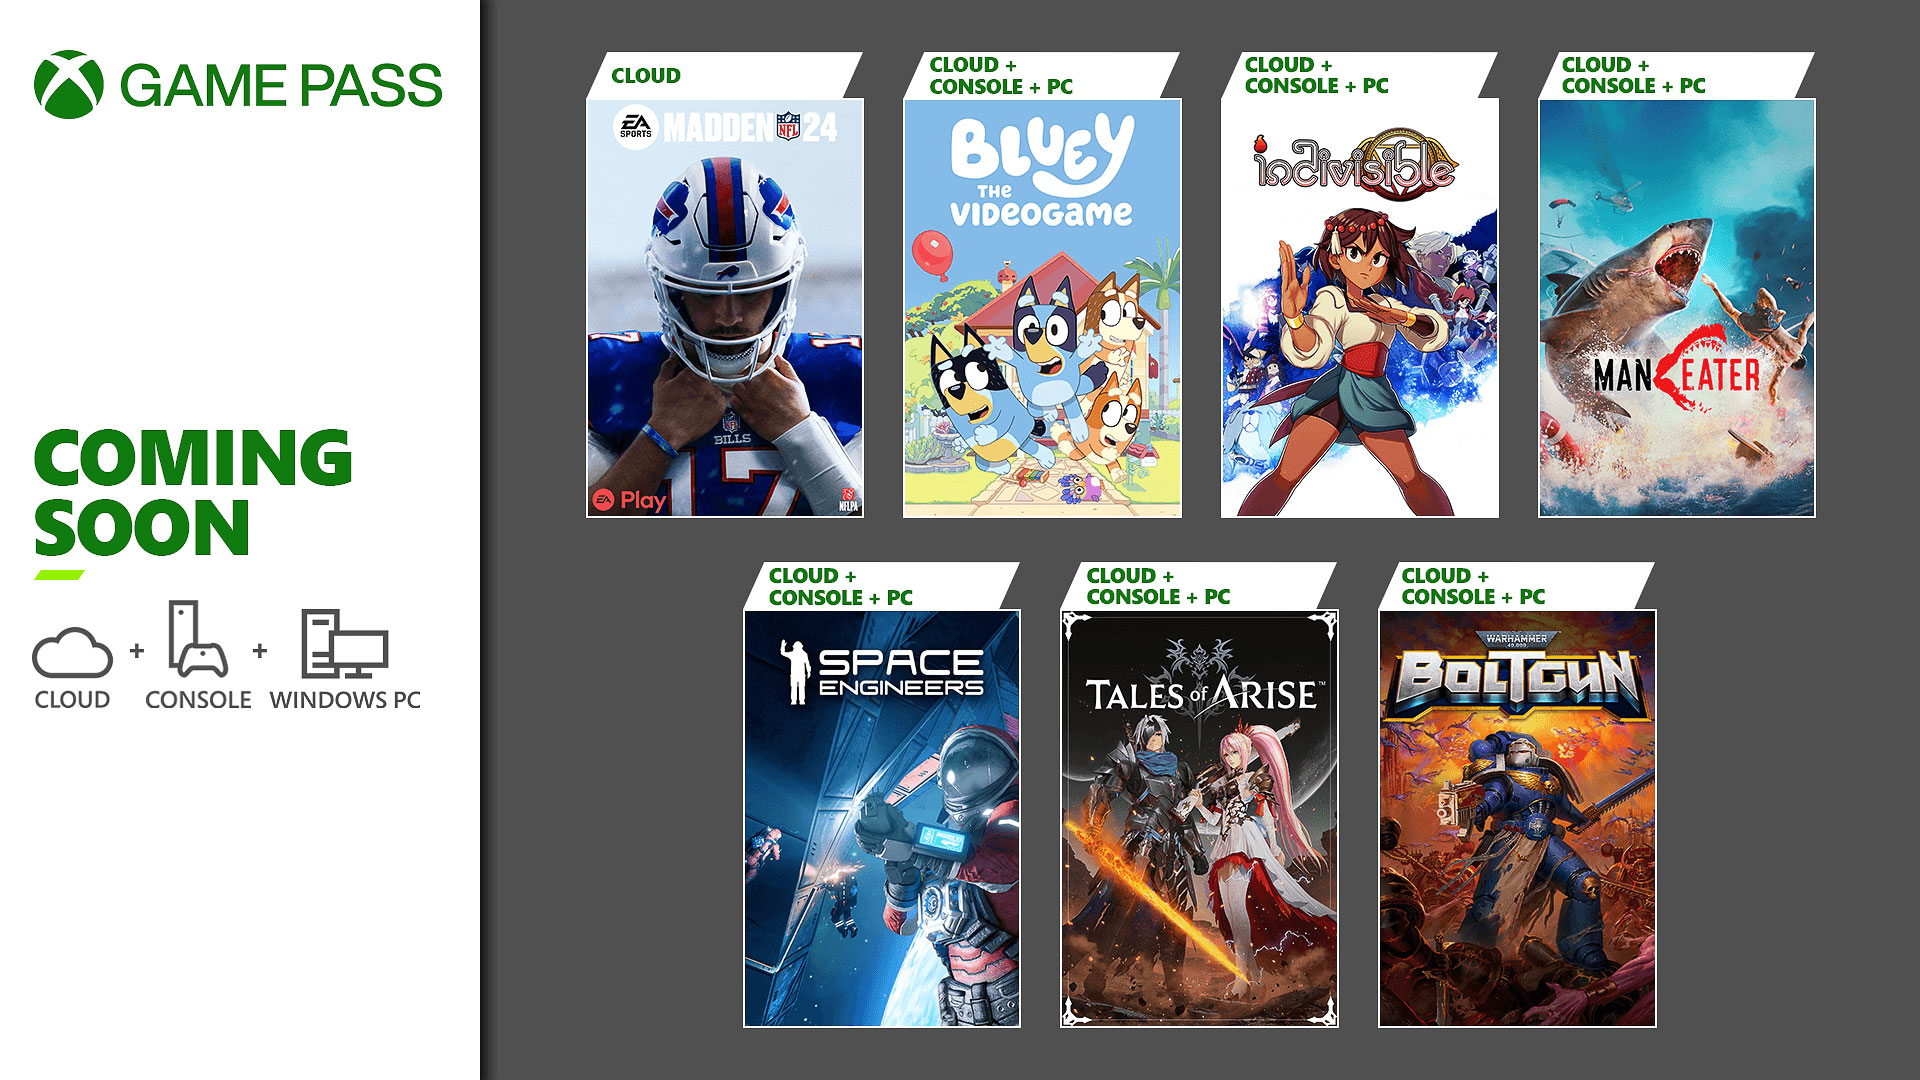 Xbox has shared the second batch of games joining Game Pass in February